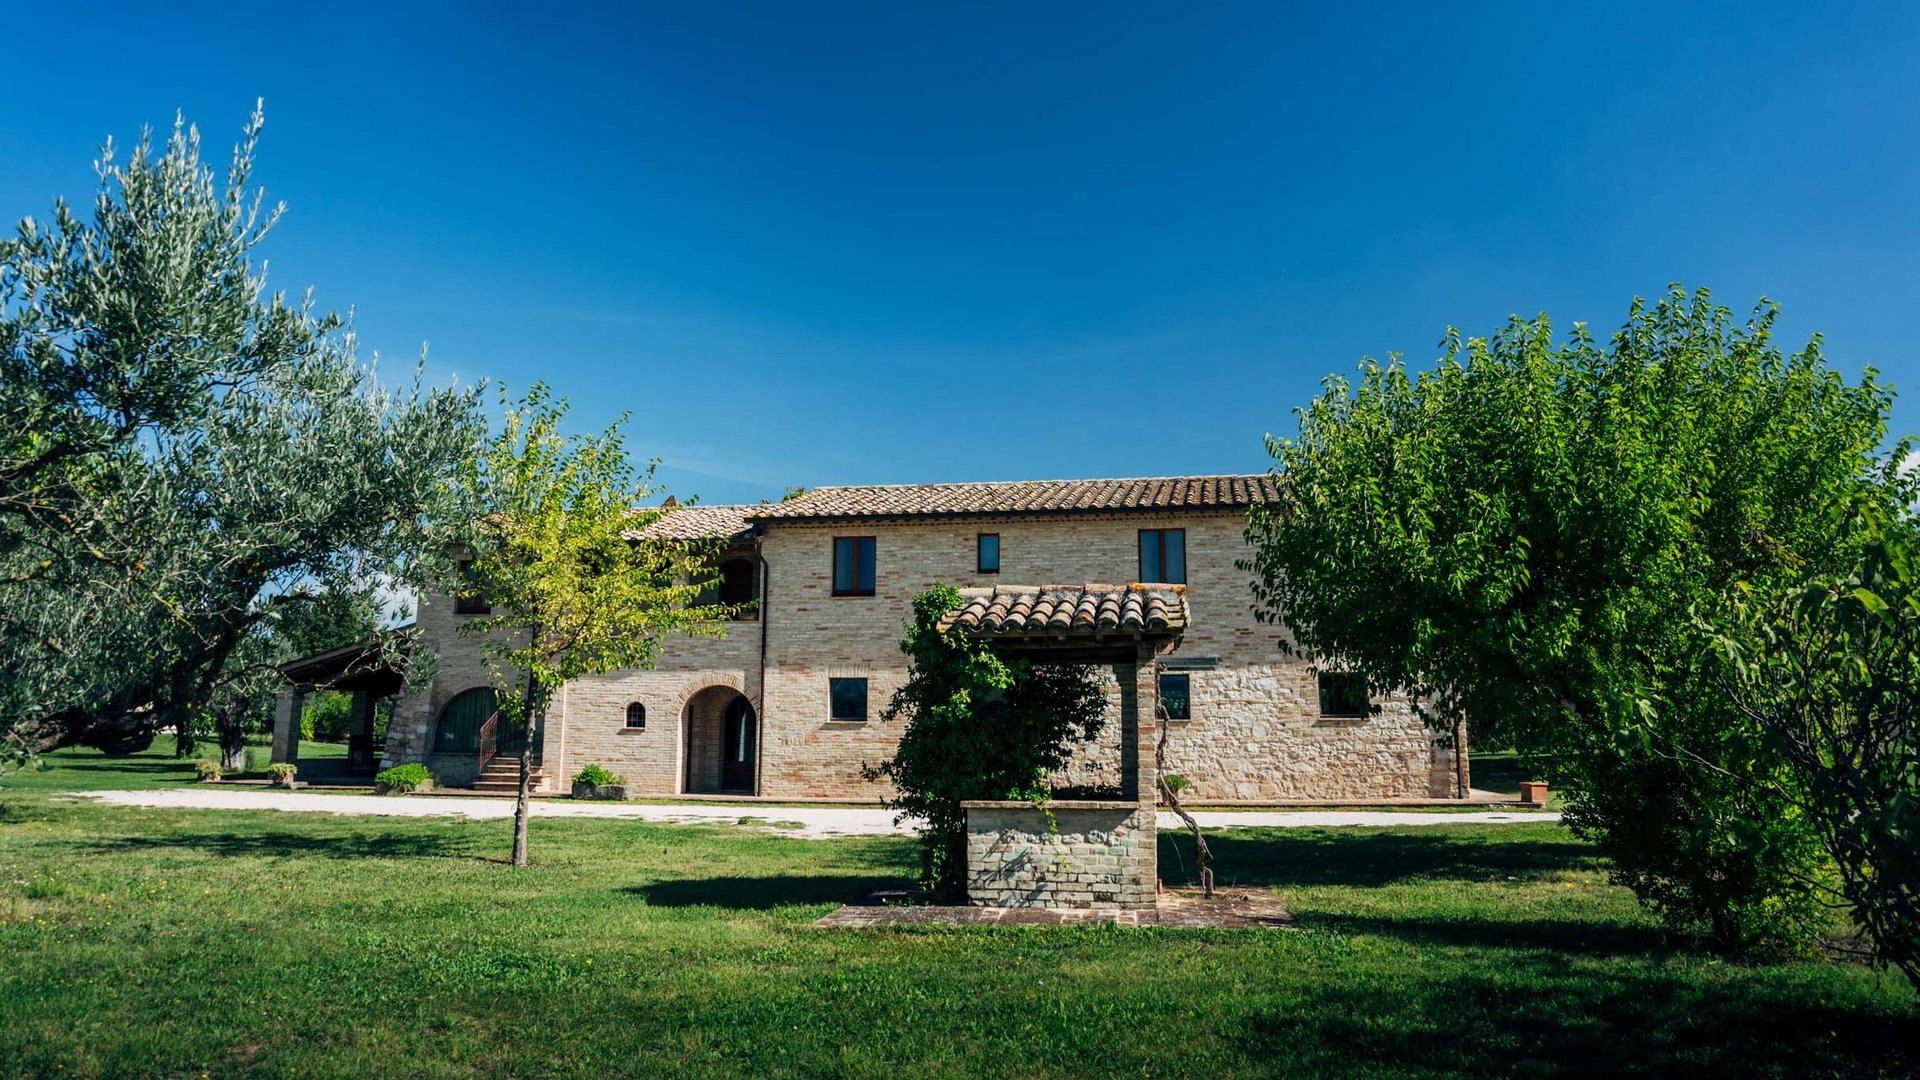 Holidays with your family? Our resort in Umbria awaits you.